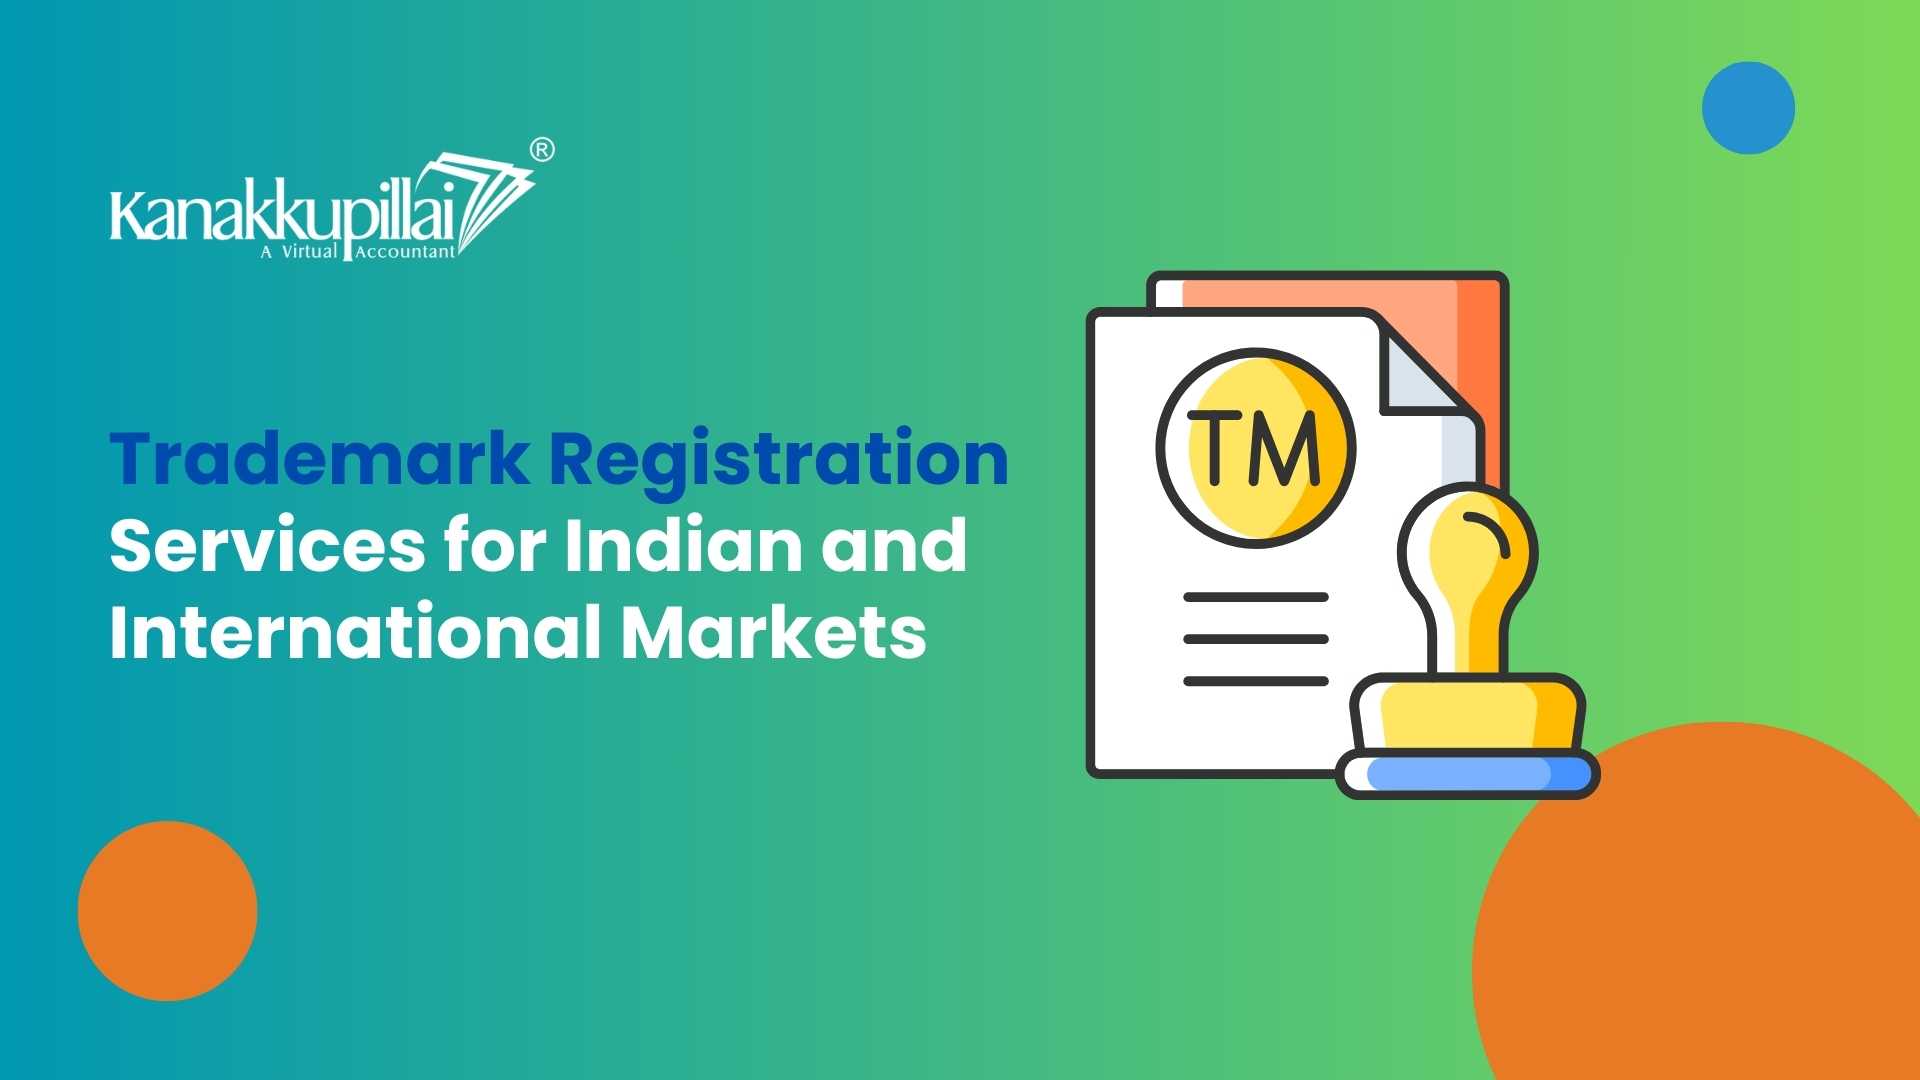 You are currently viewing Trademark Registration Services for Indian and International Markets